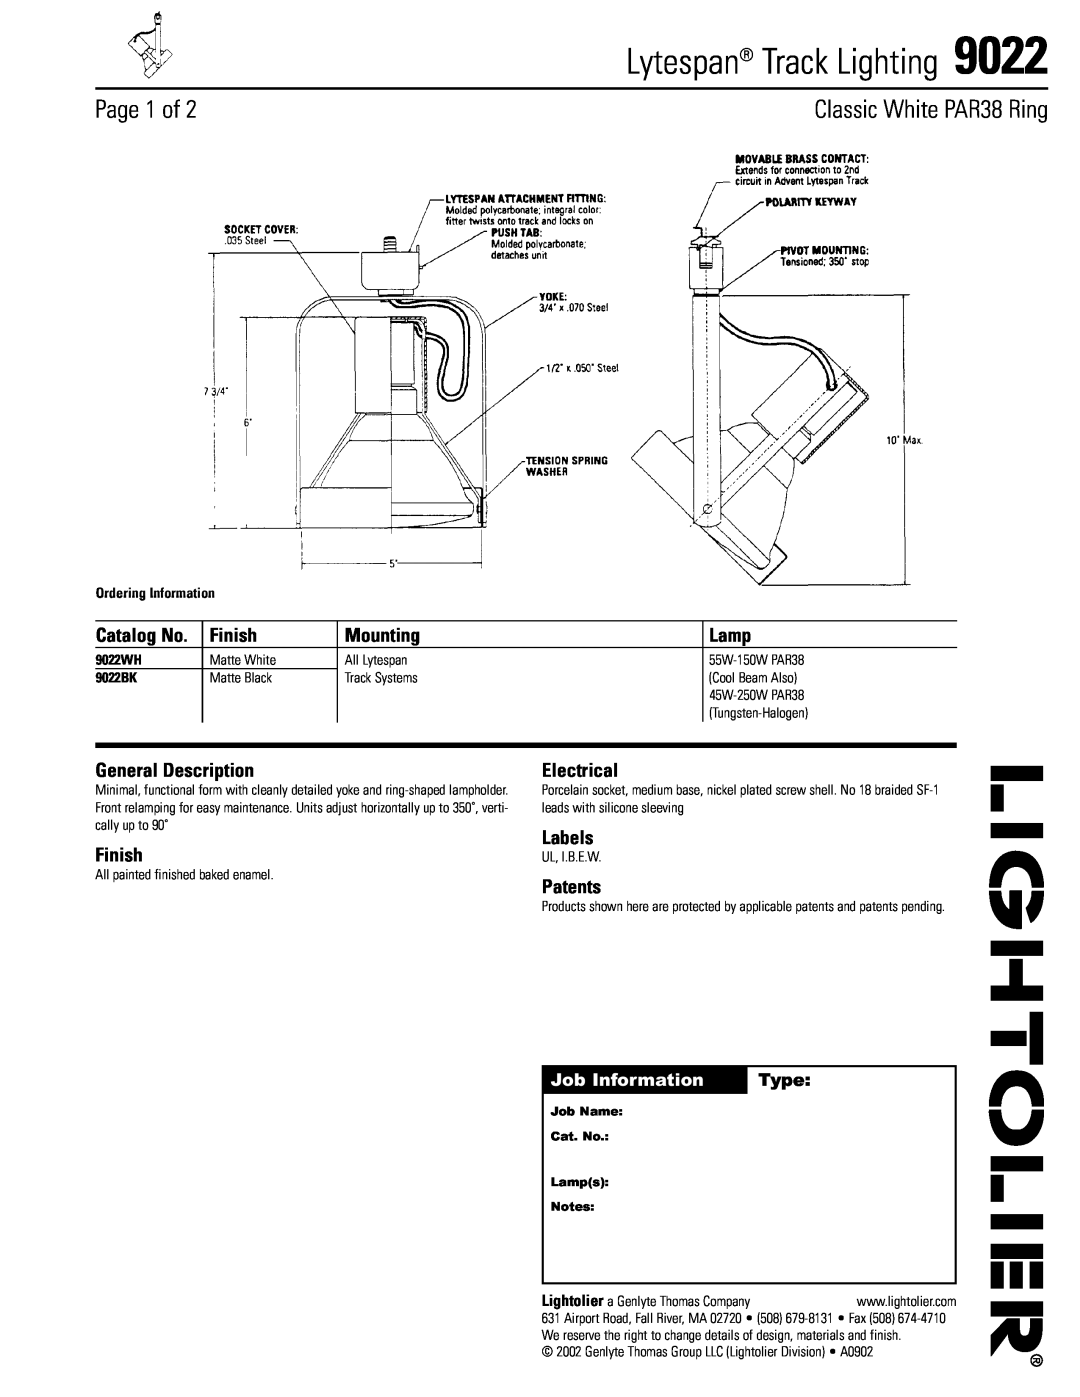 Lightolier 9022 manual Lytespan Track Lighting, Page 1 of, Classic White PAR38 Ring, Finish, Mounting, Lamp, Electrical 